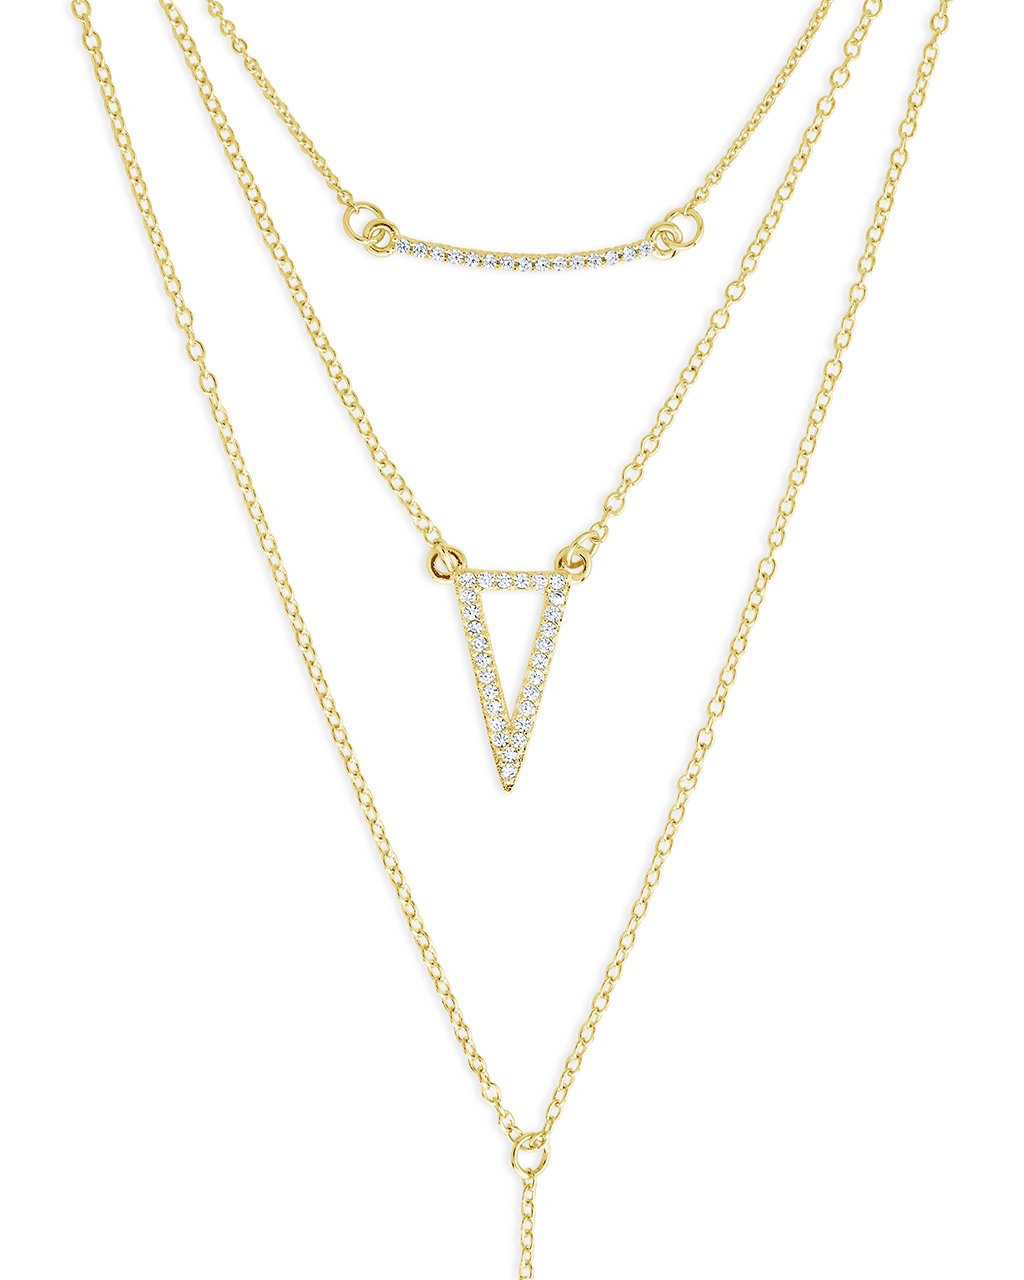 Layered Y Necklace with CZ Bar and Triangle - Sterling Forever